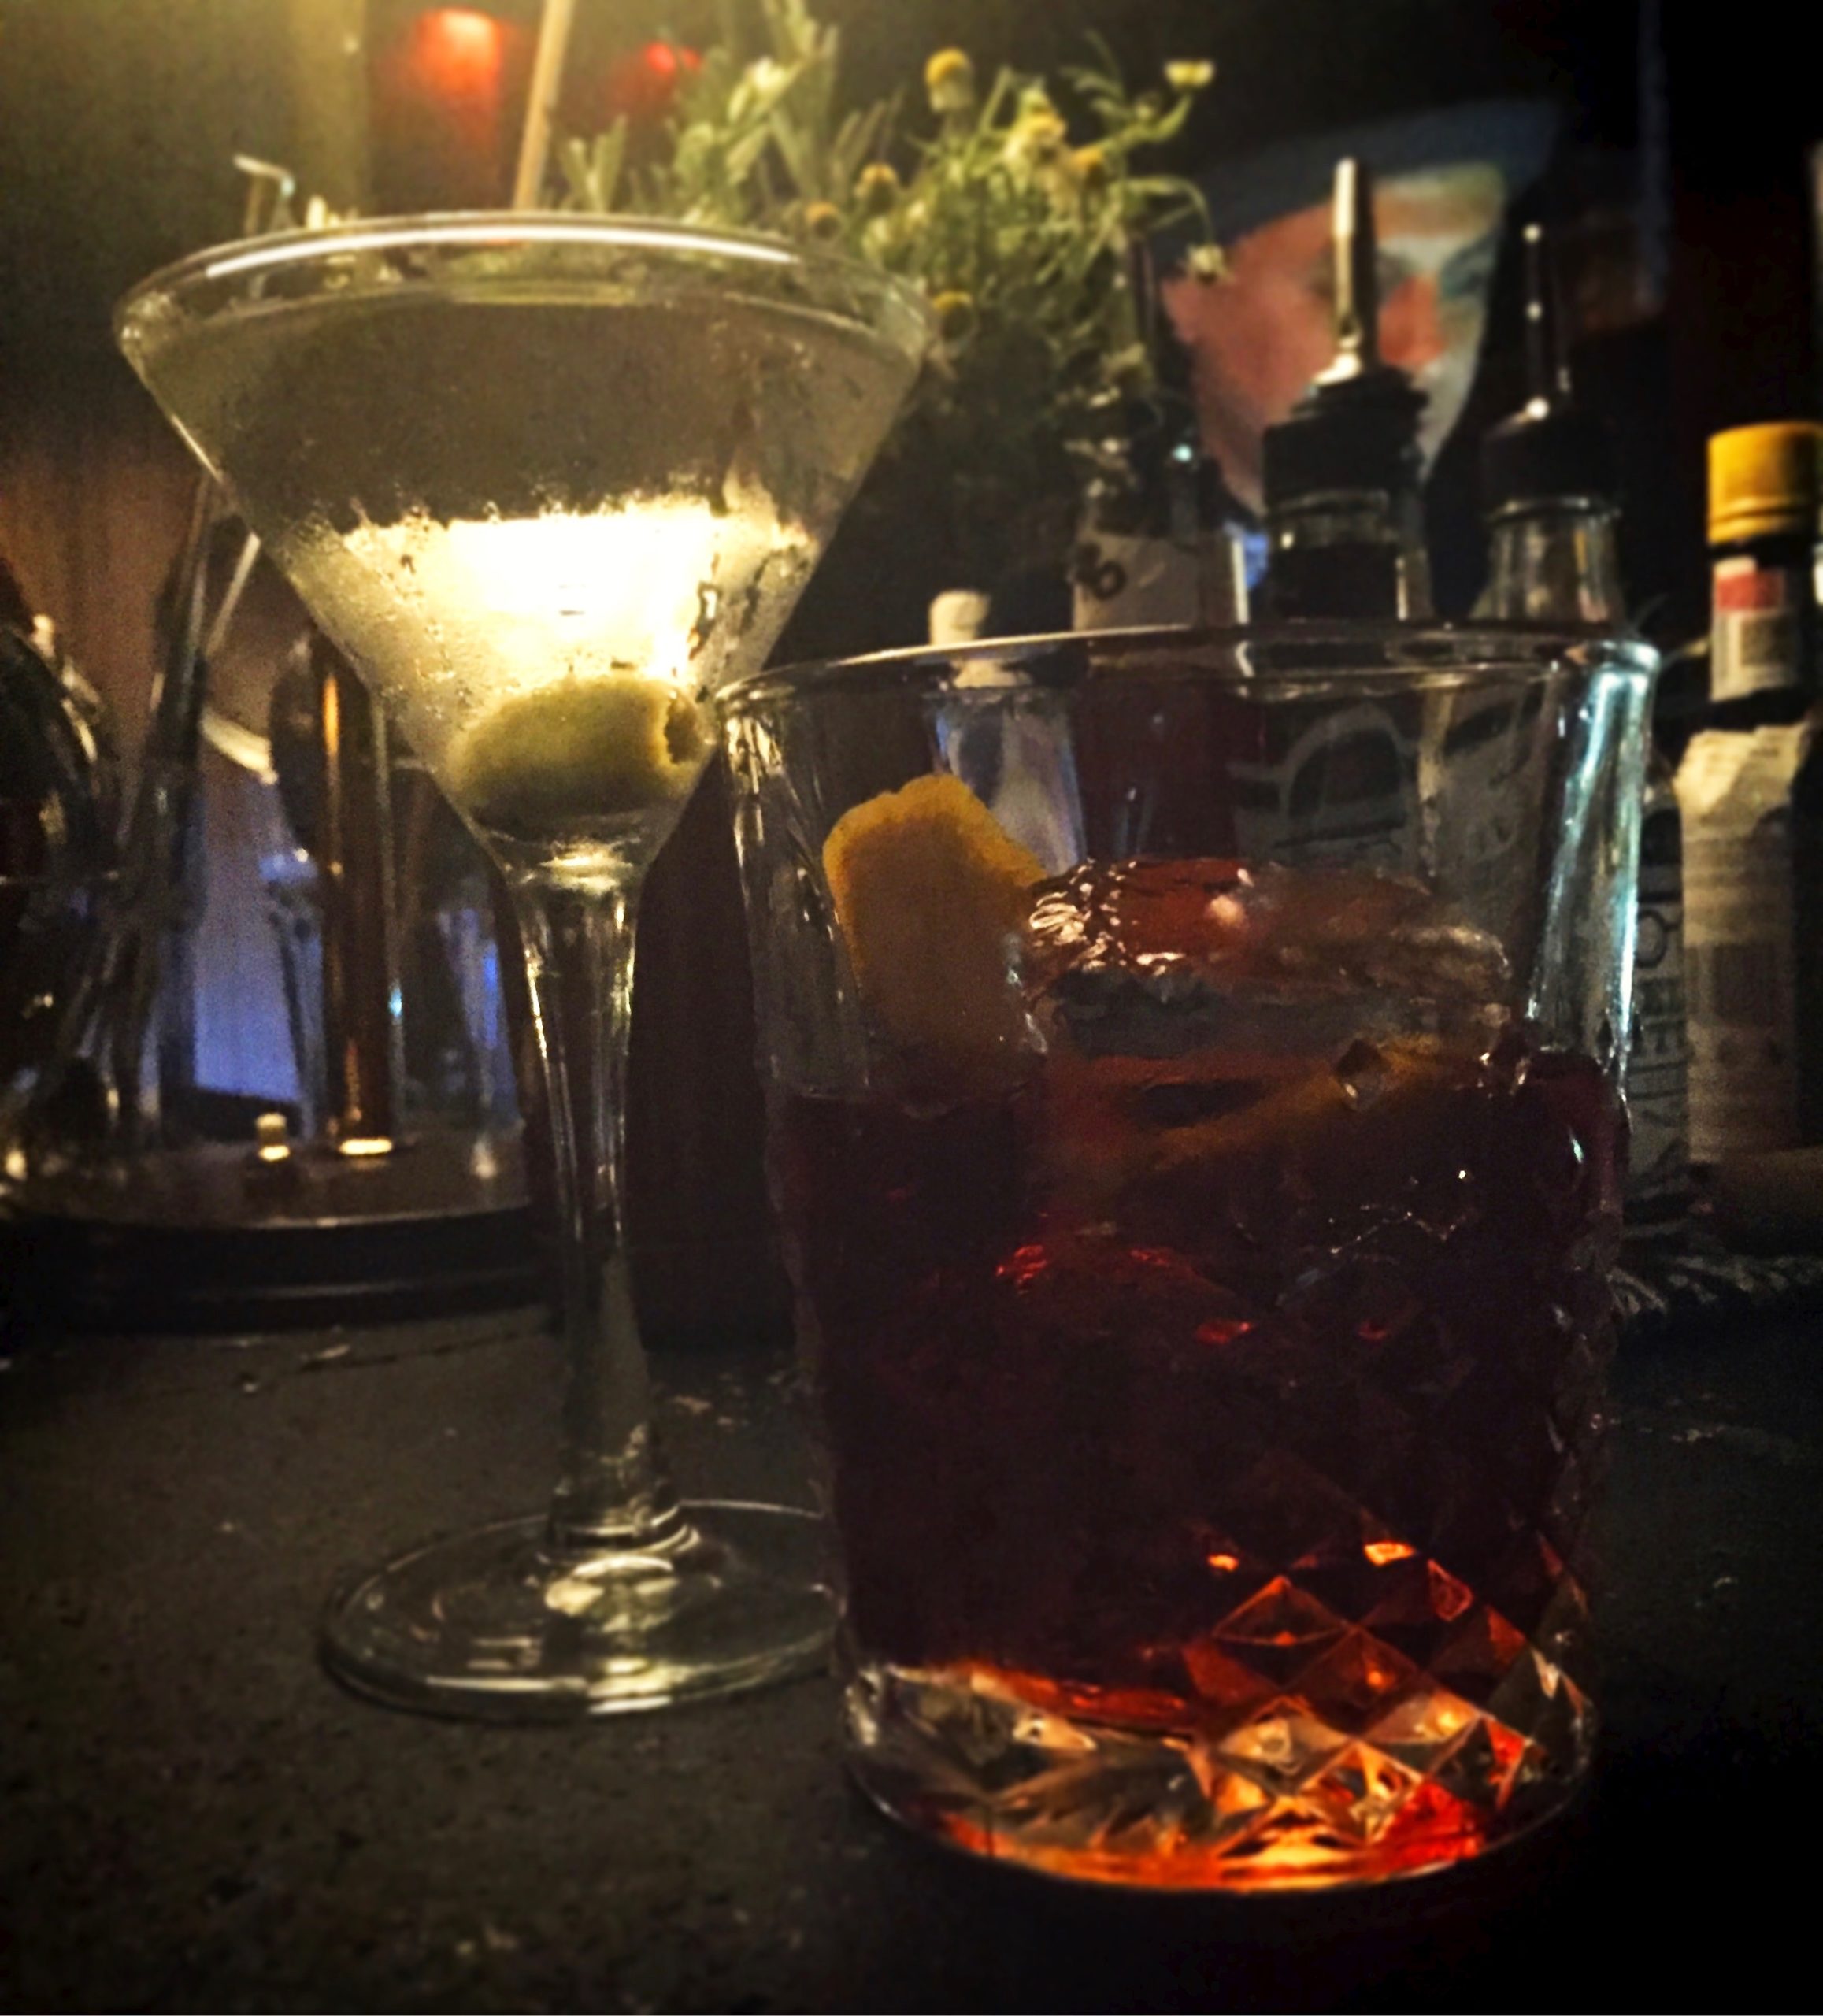 A martini on the left and negroni on the right in a dark bar